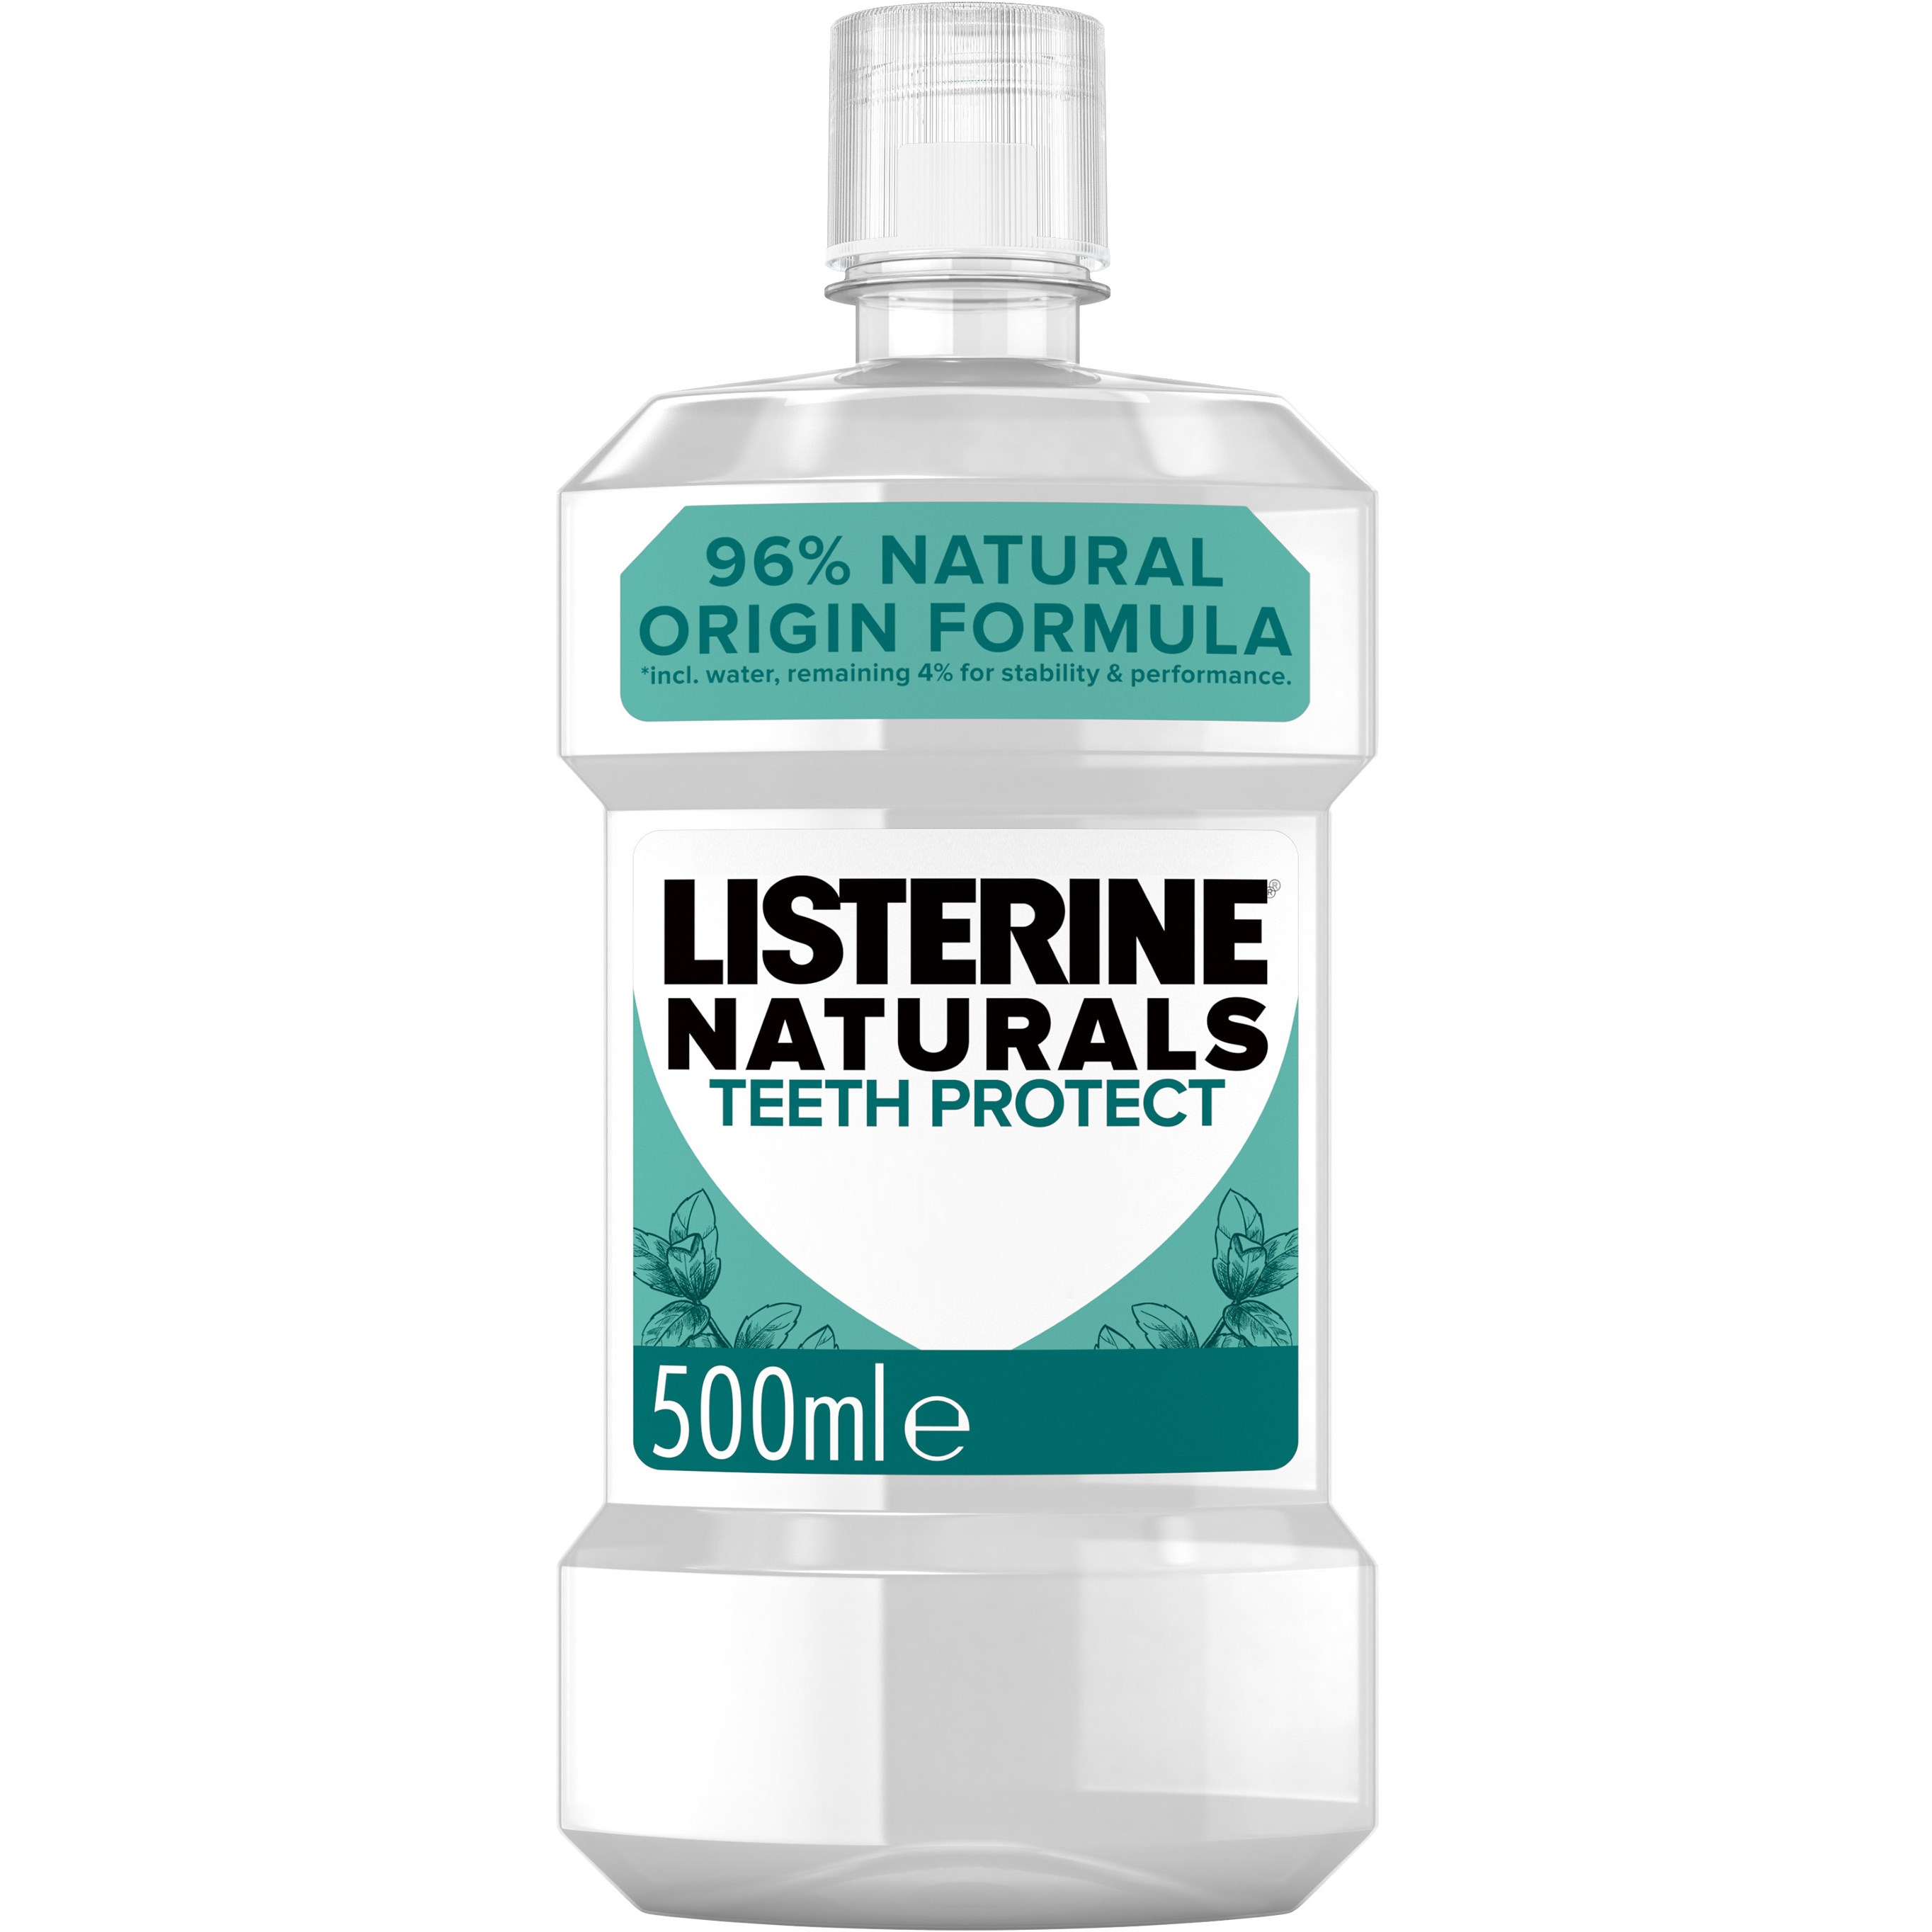 Listerine Naturals Teeth Protect Mouthwash 500 ml